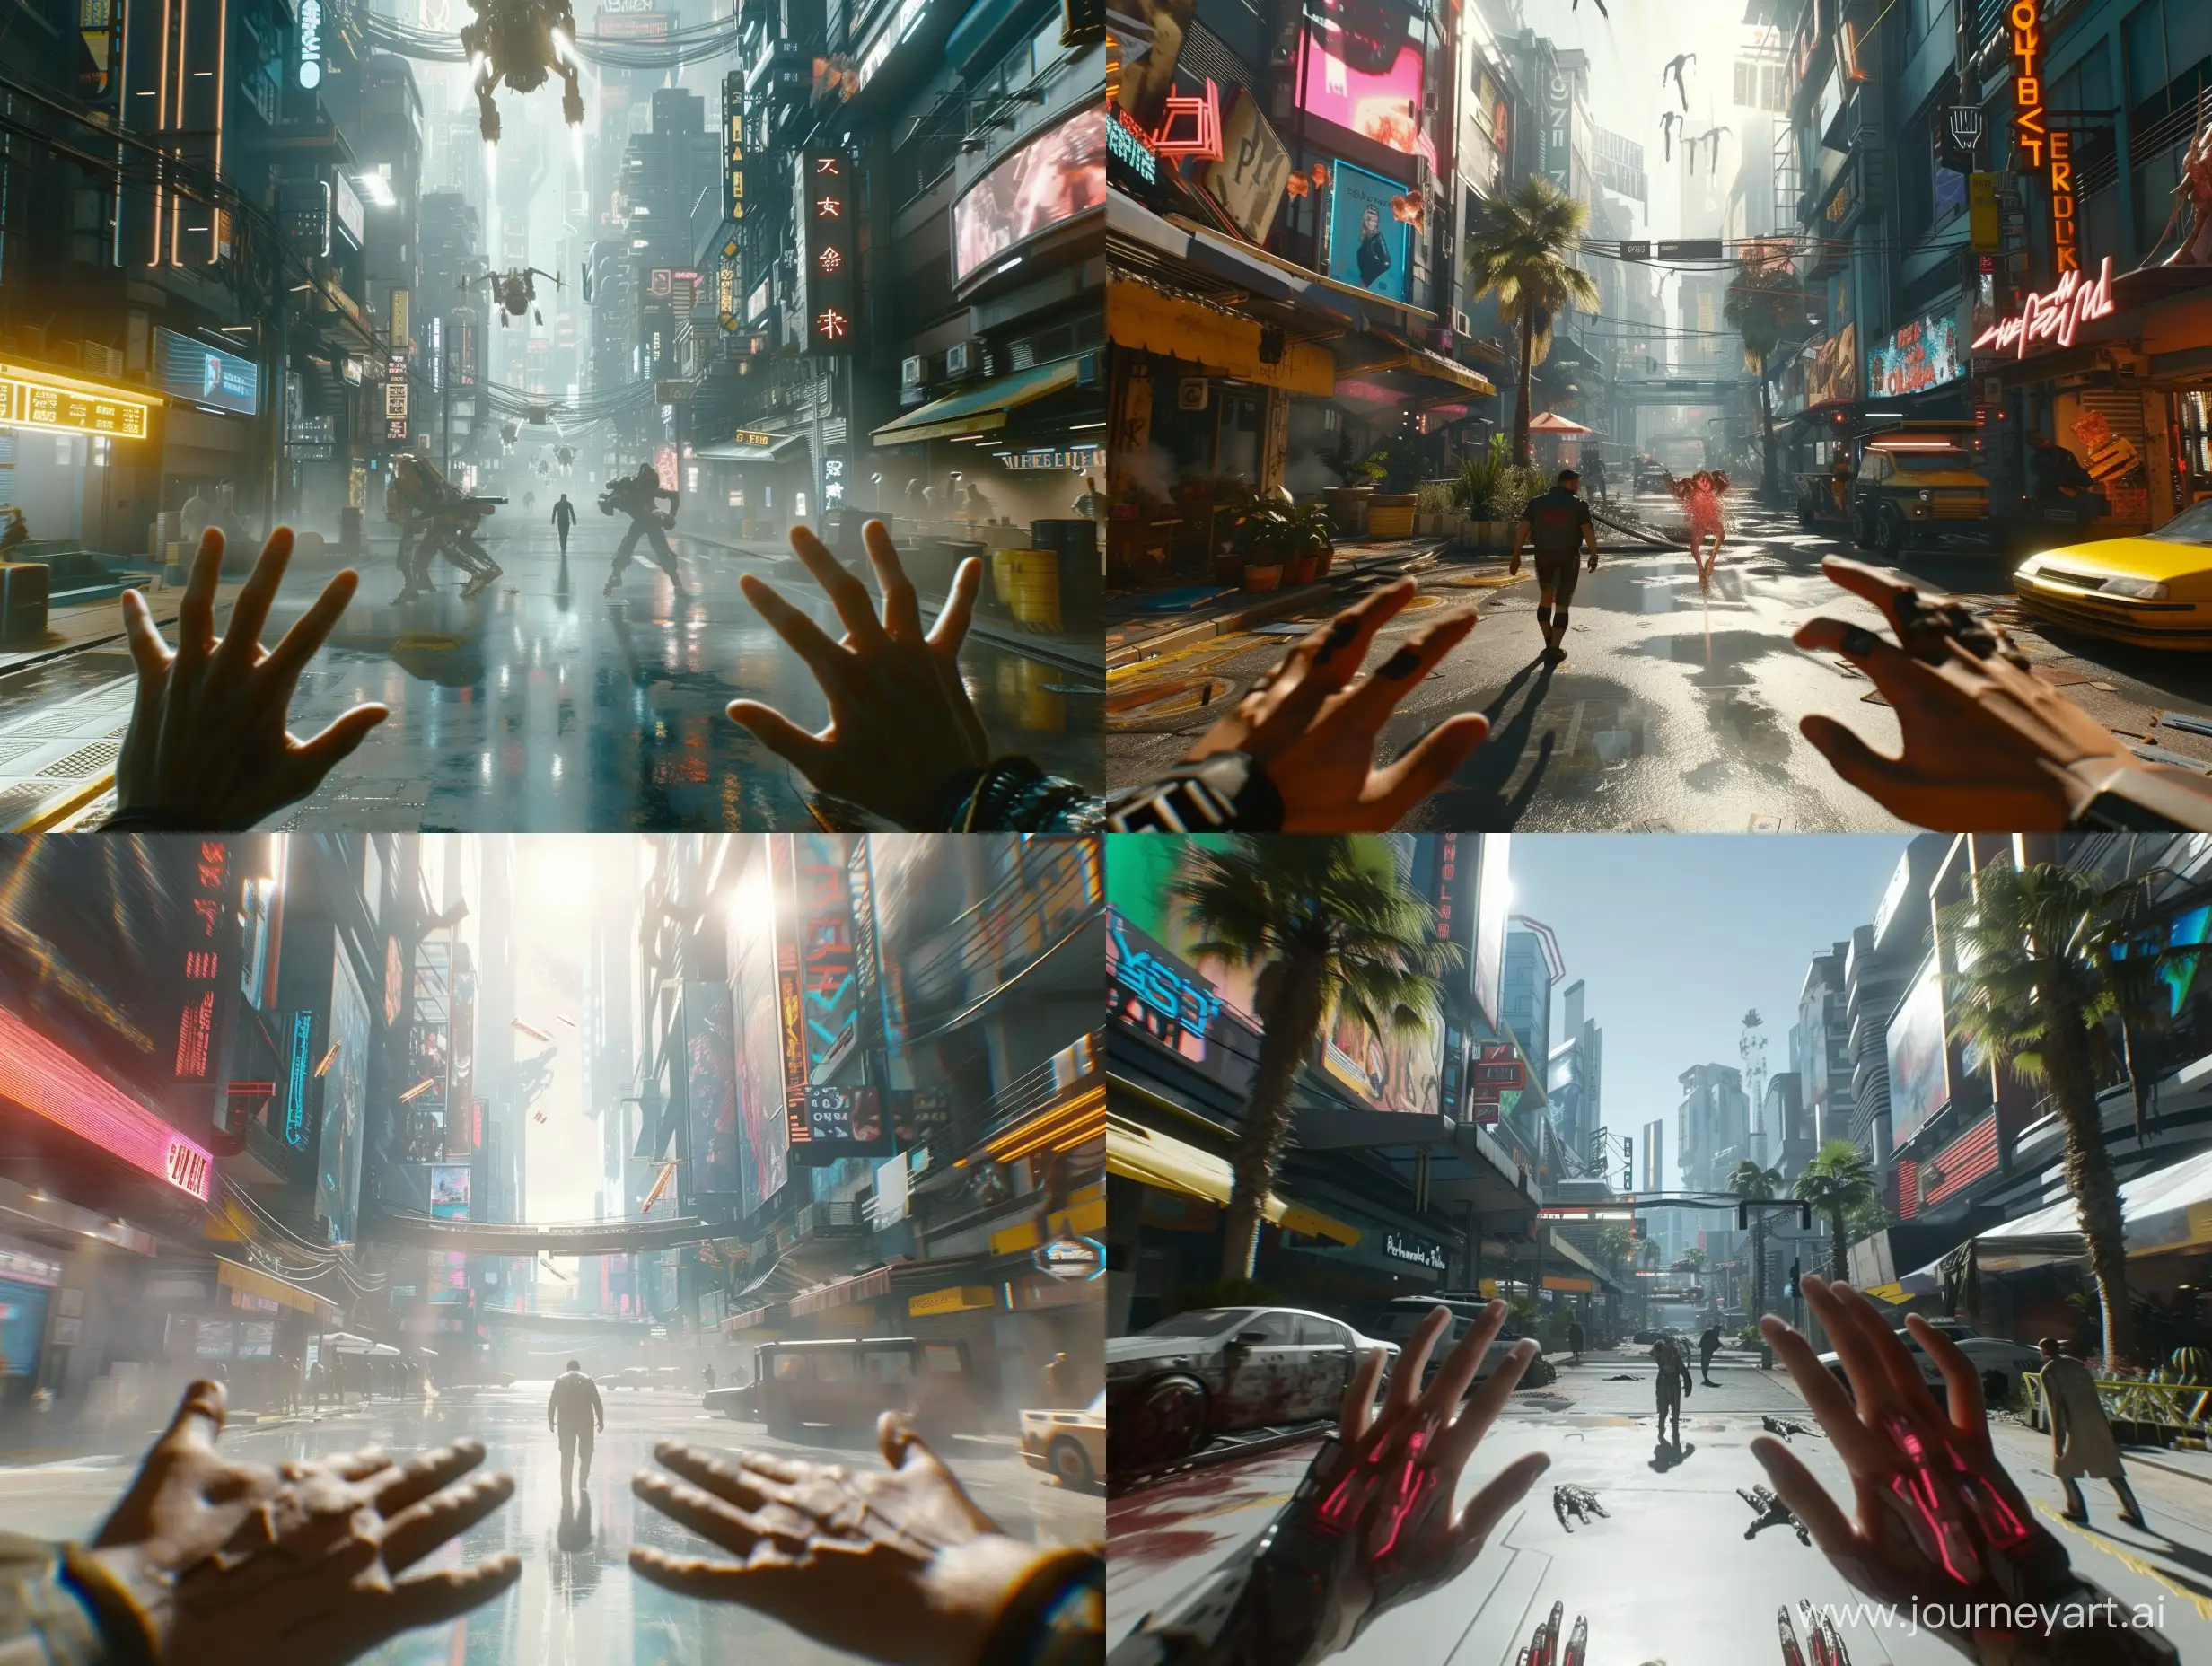 The third-person video game "Cyberpunk 2077" features gameplay where the player walks through a futuristic city with visible hands at the bottom of the screen and enhanced ray tracing effects. This version of the game is designed for the PS5 platform.

